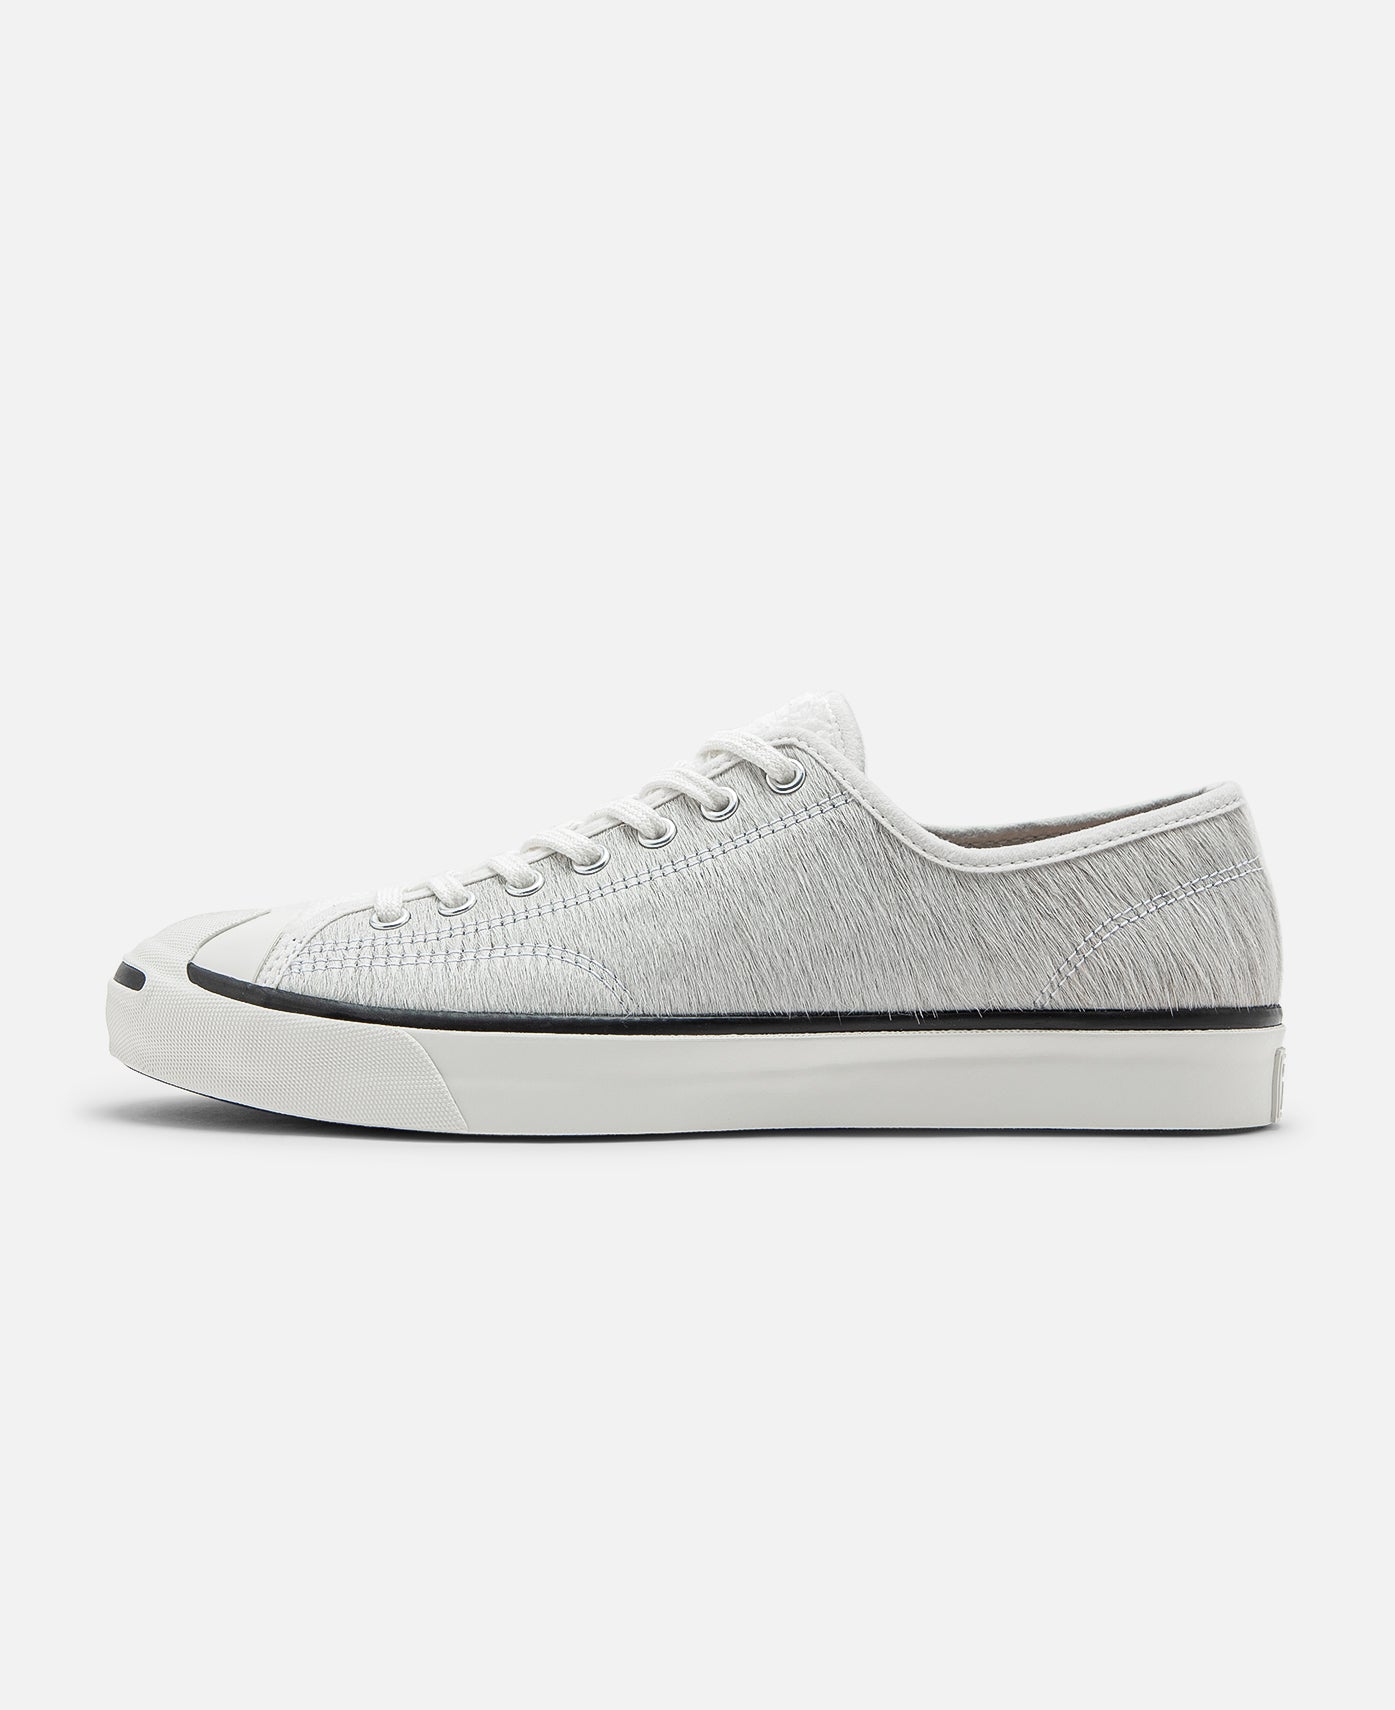 værdighed Titicacasøen transfusion CLOT x Converse - Jack Purcell Ox (Light Grey) – JUICESTORE